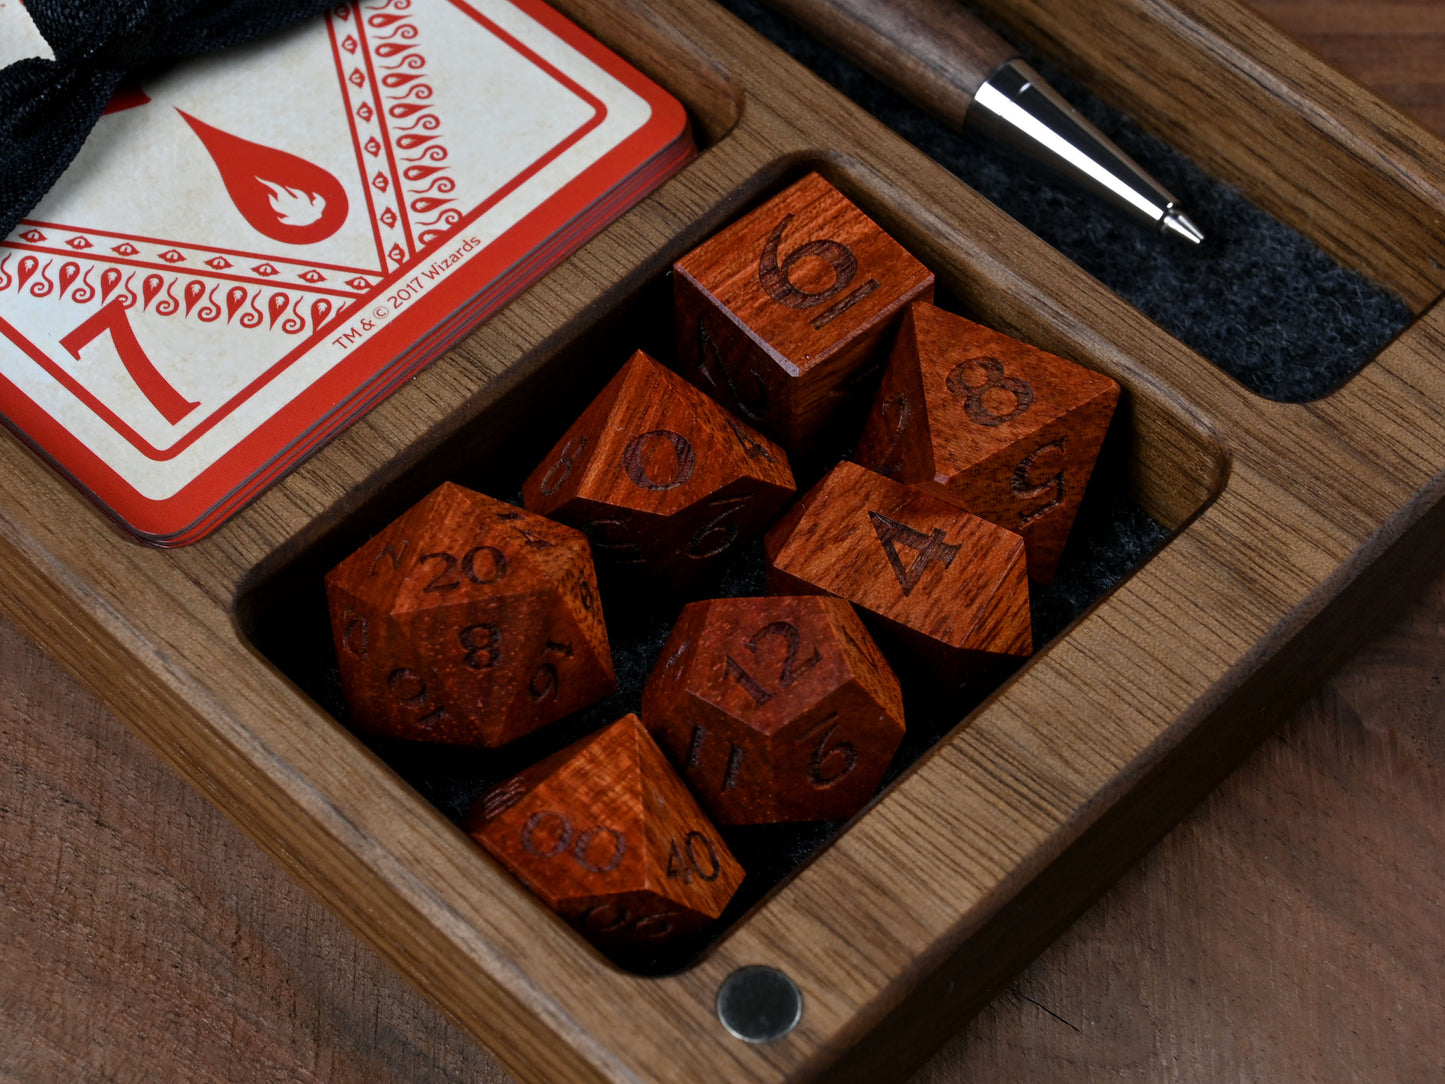 Bloodwood polyhedral dice set for dungeons and dragons rpg